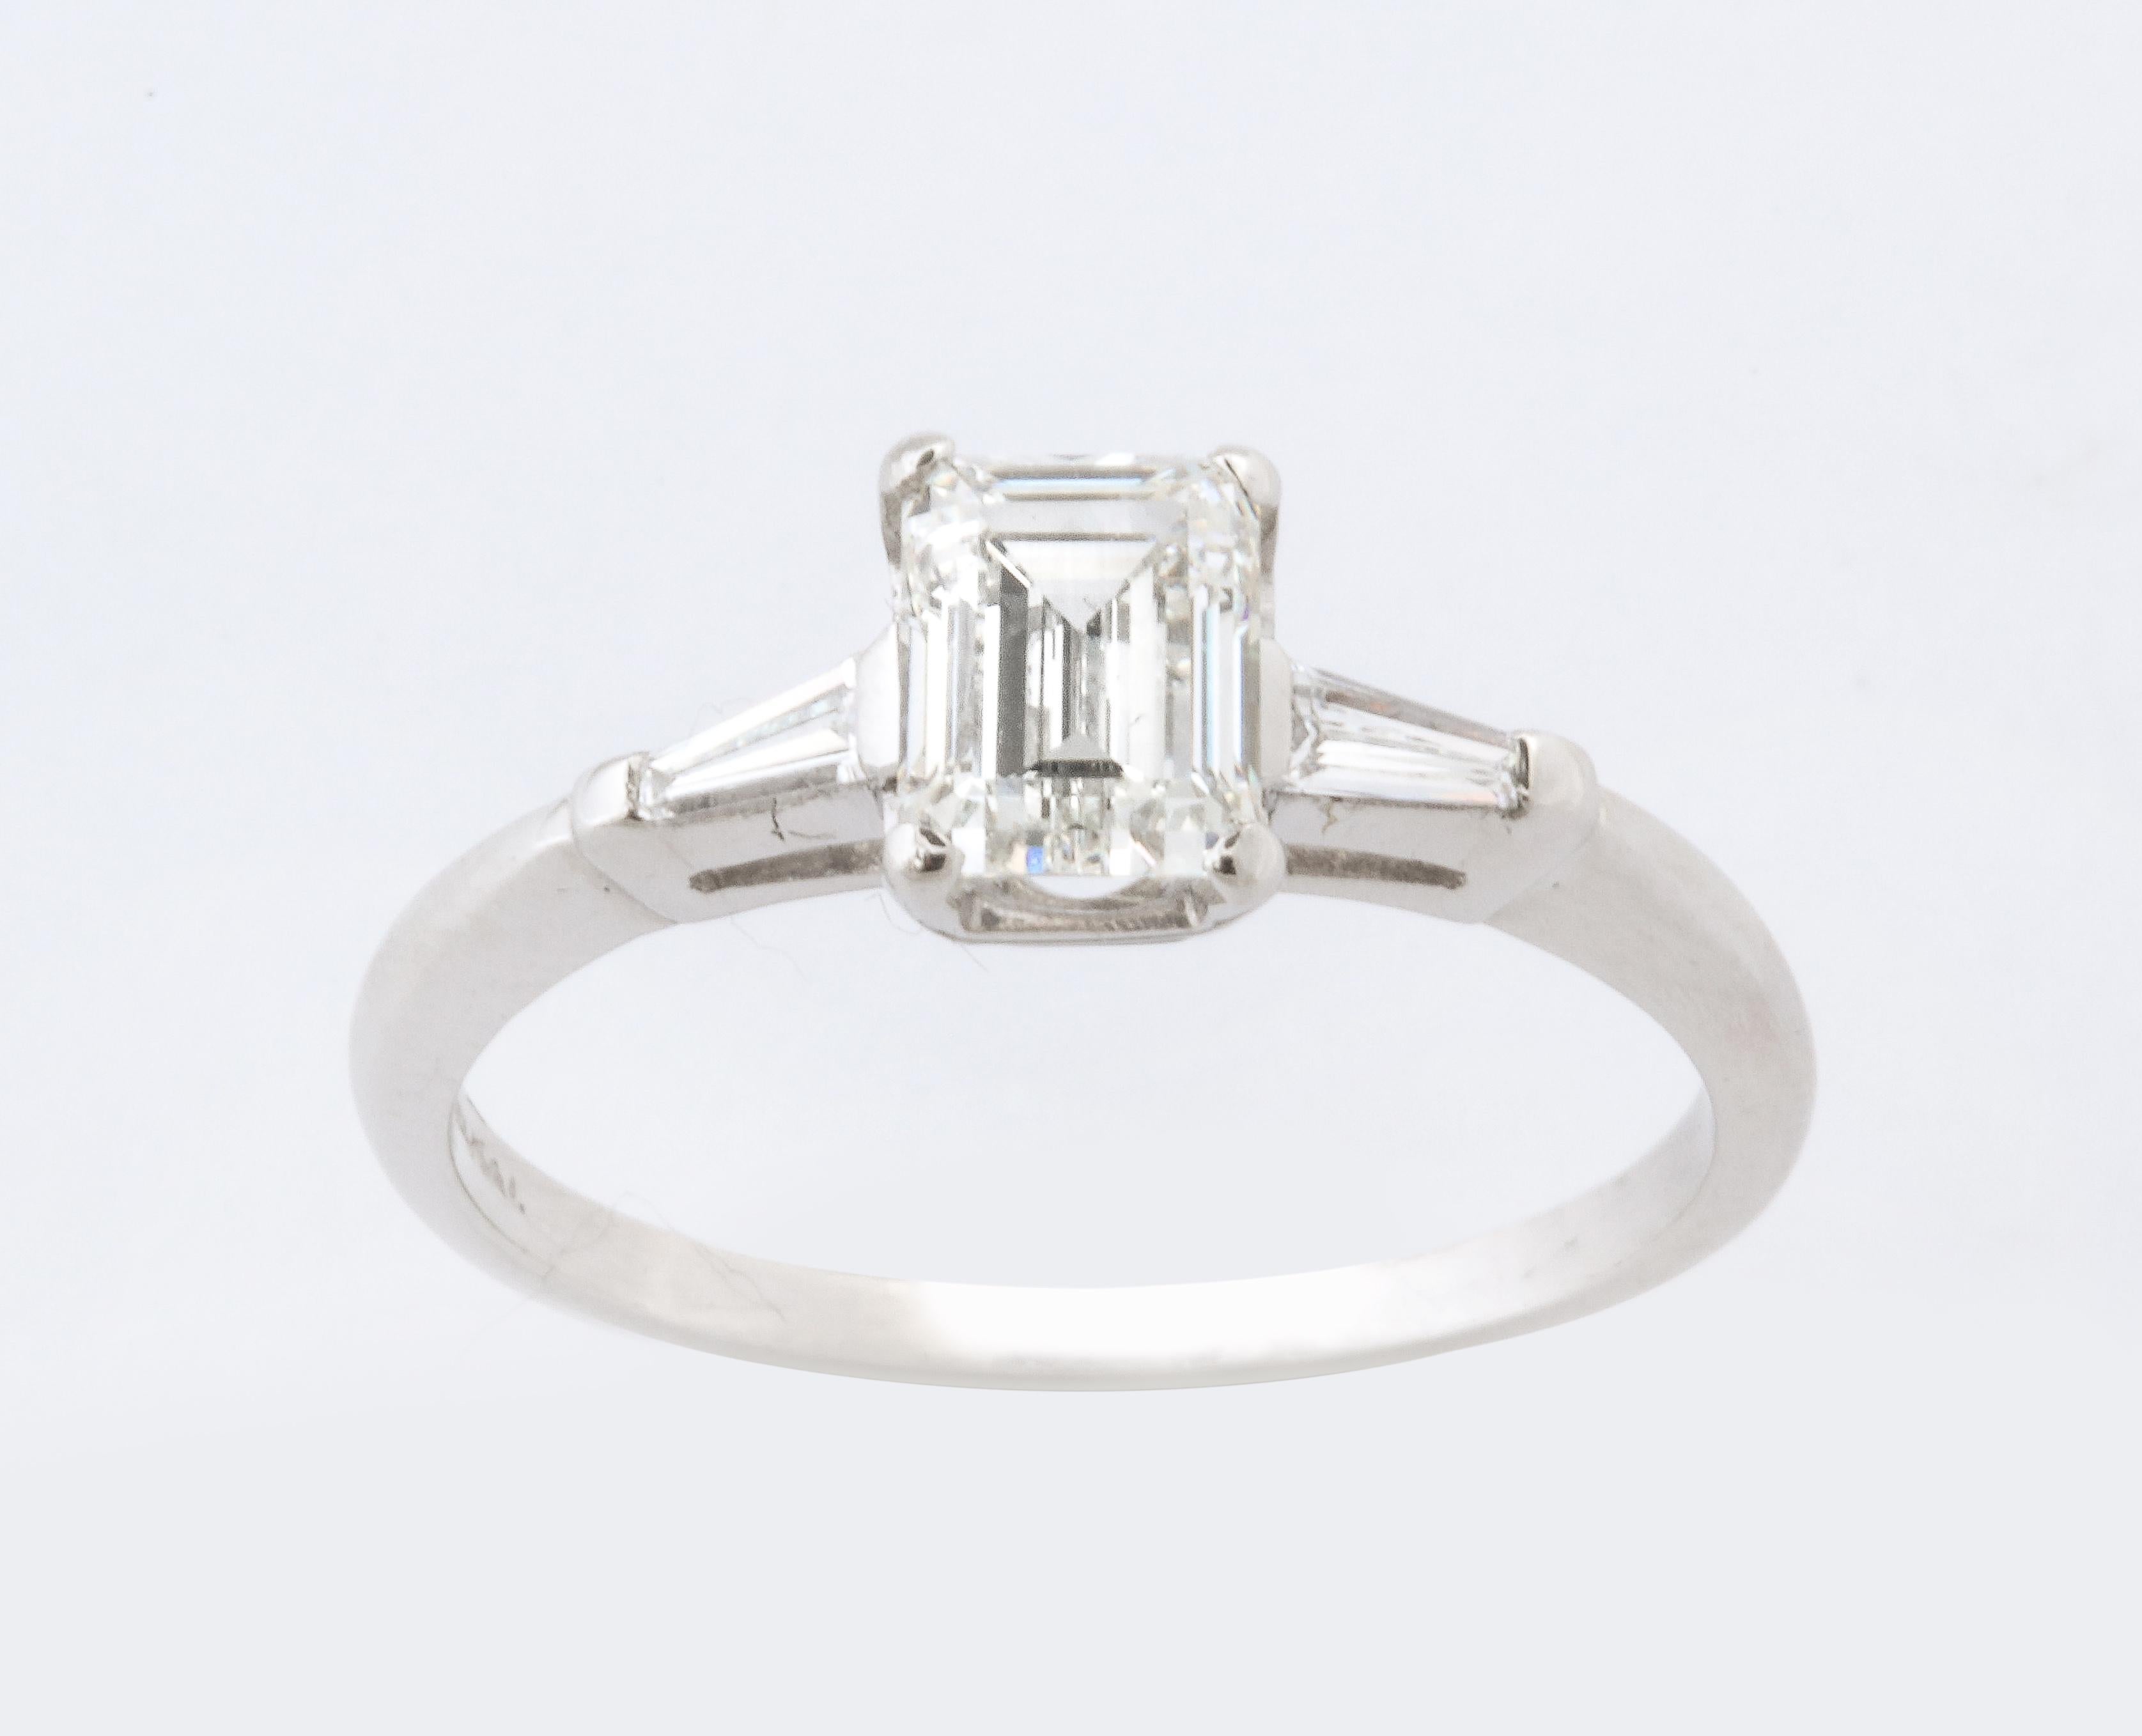 A stunning Emerald Cut  fine quality diamond set in a classic platinum mounting with baguette cuts on each side typical of the 1920/1930
The center diamond is  1.07 CT’s vs1 G color.  A lovely classic ring.